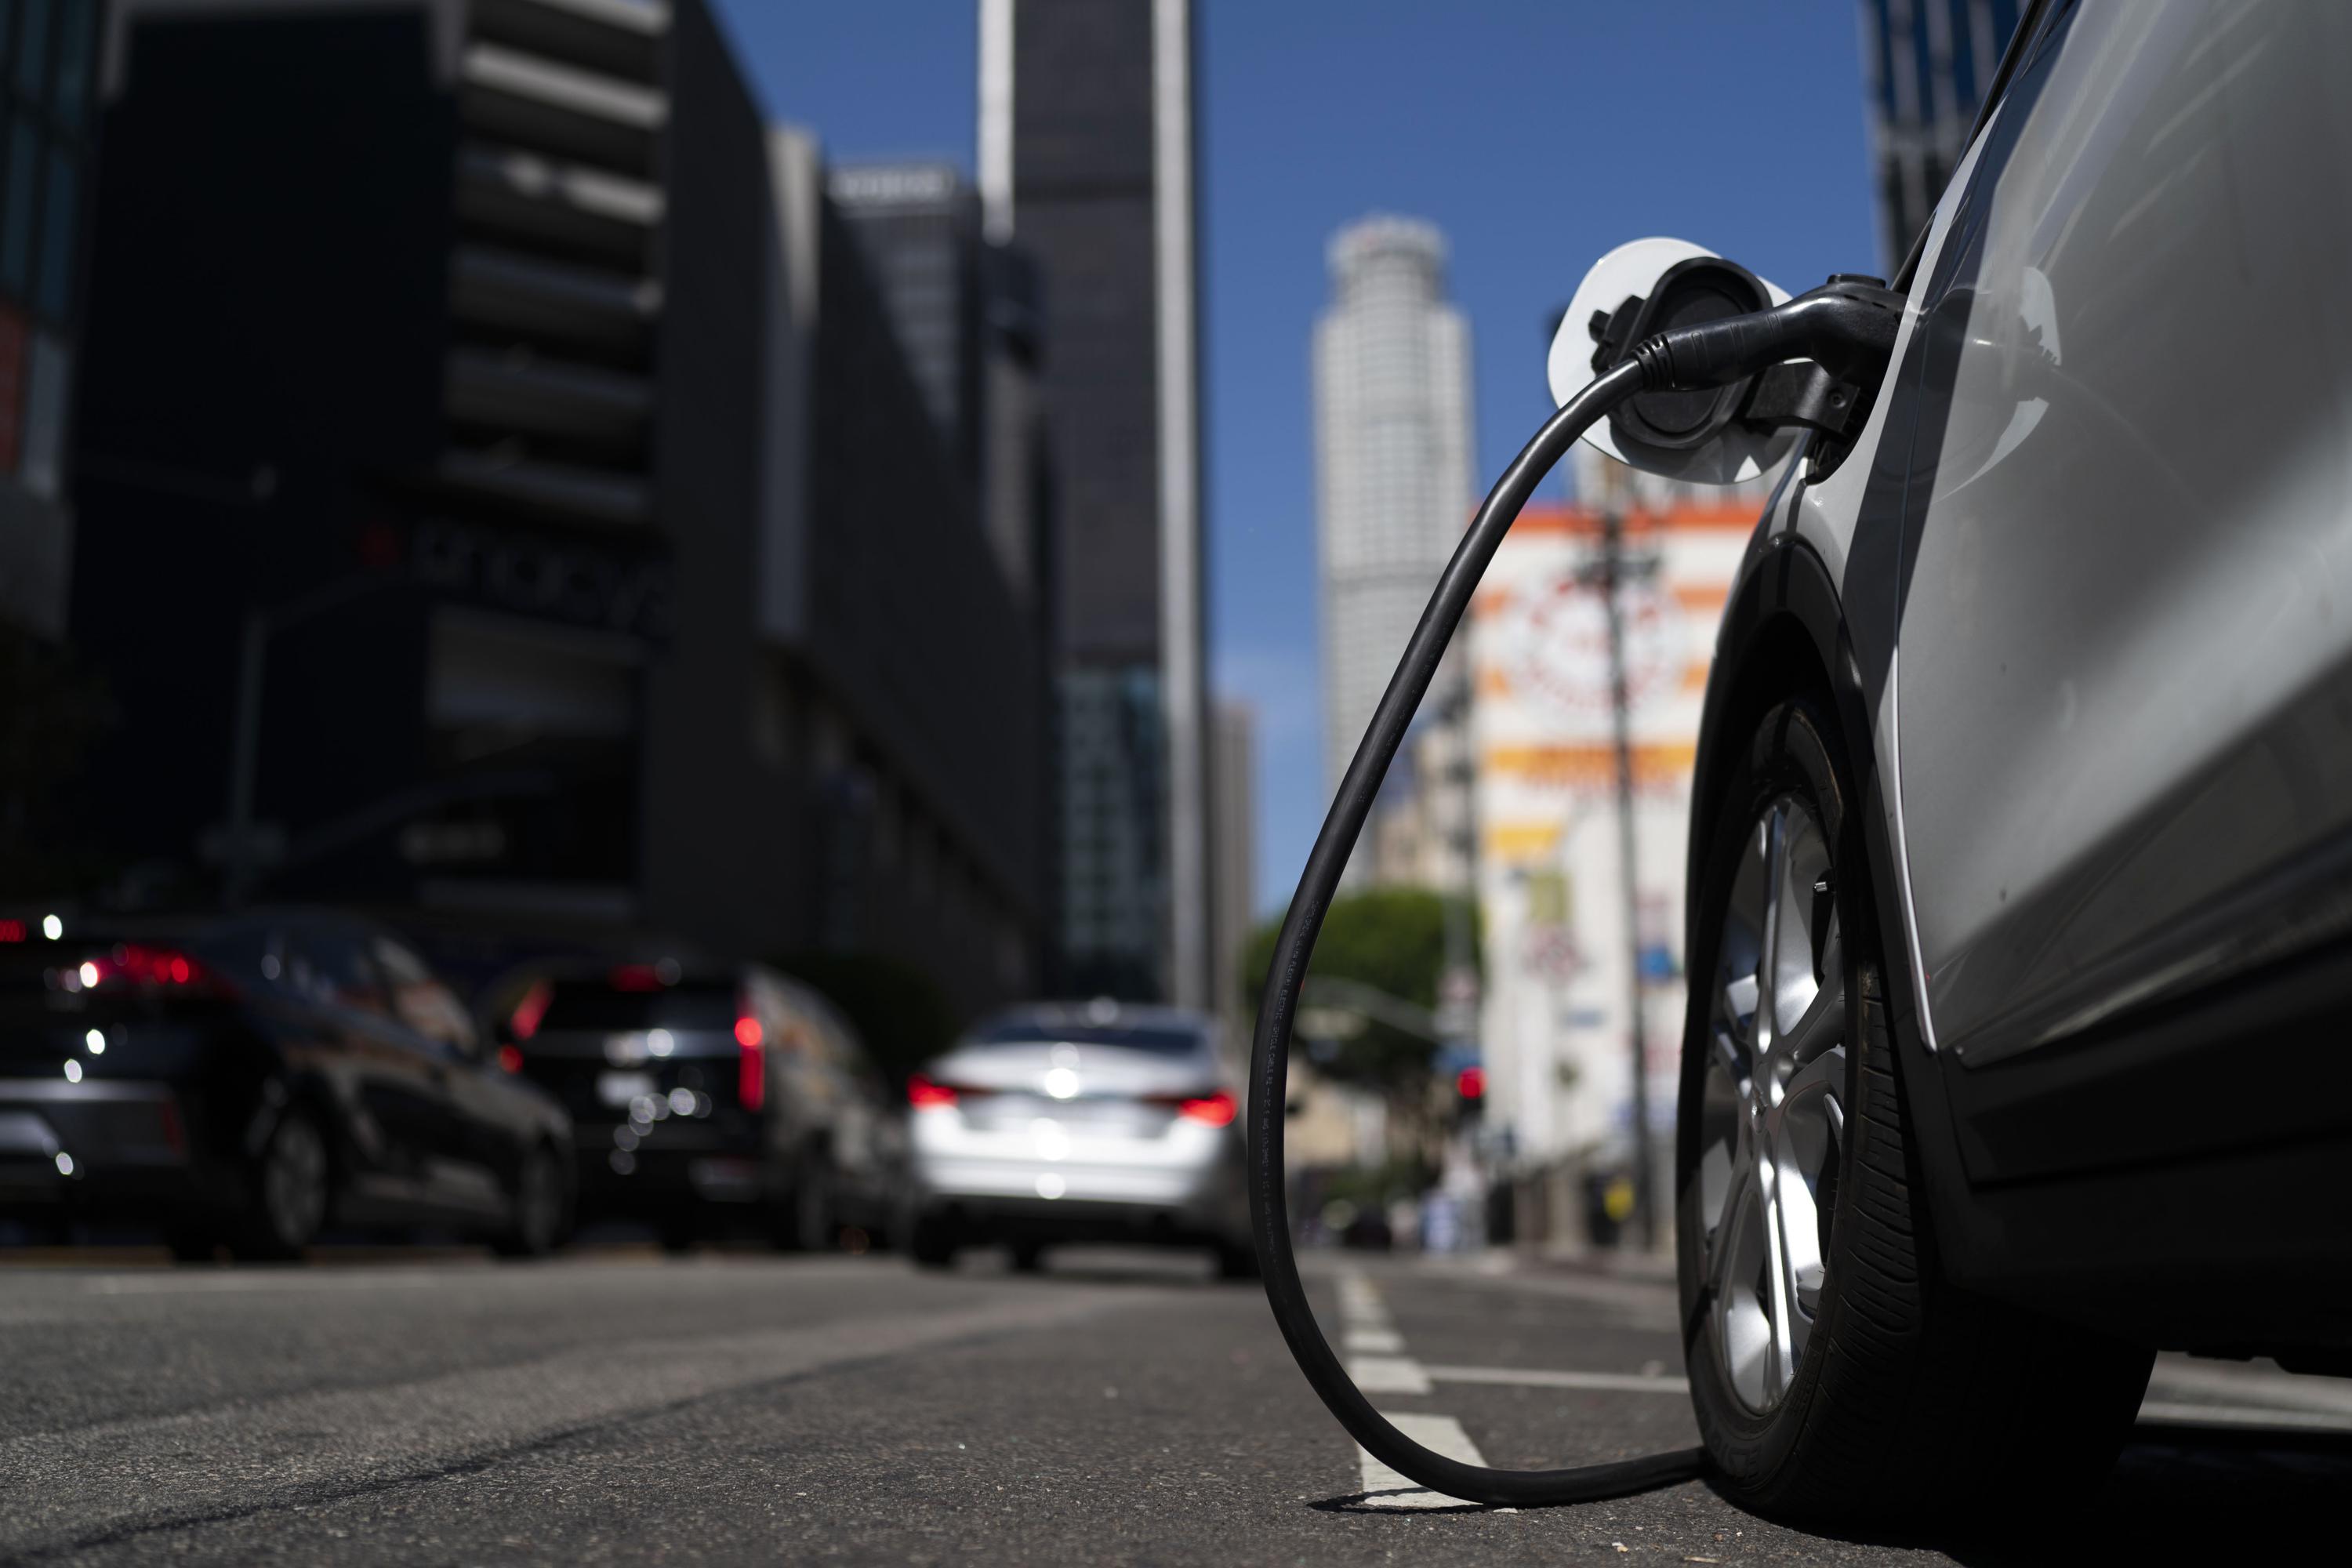 California phasing out gas vehicles in climate change fight – The Associated Press